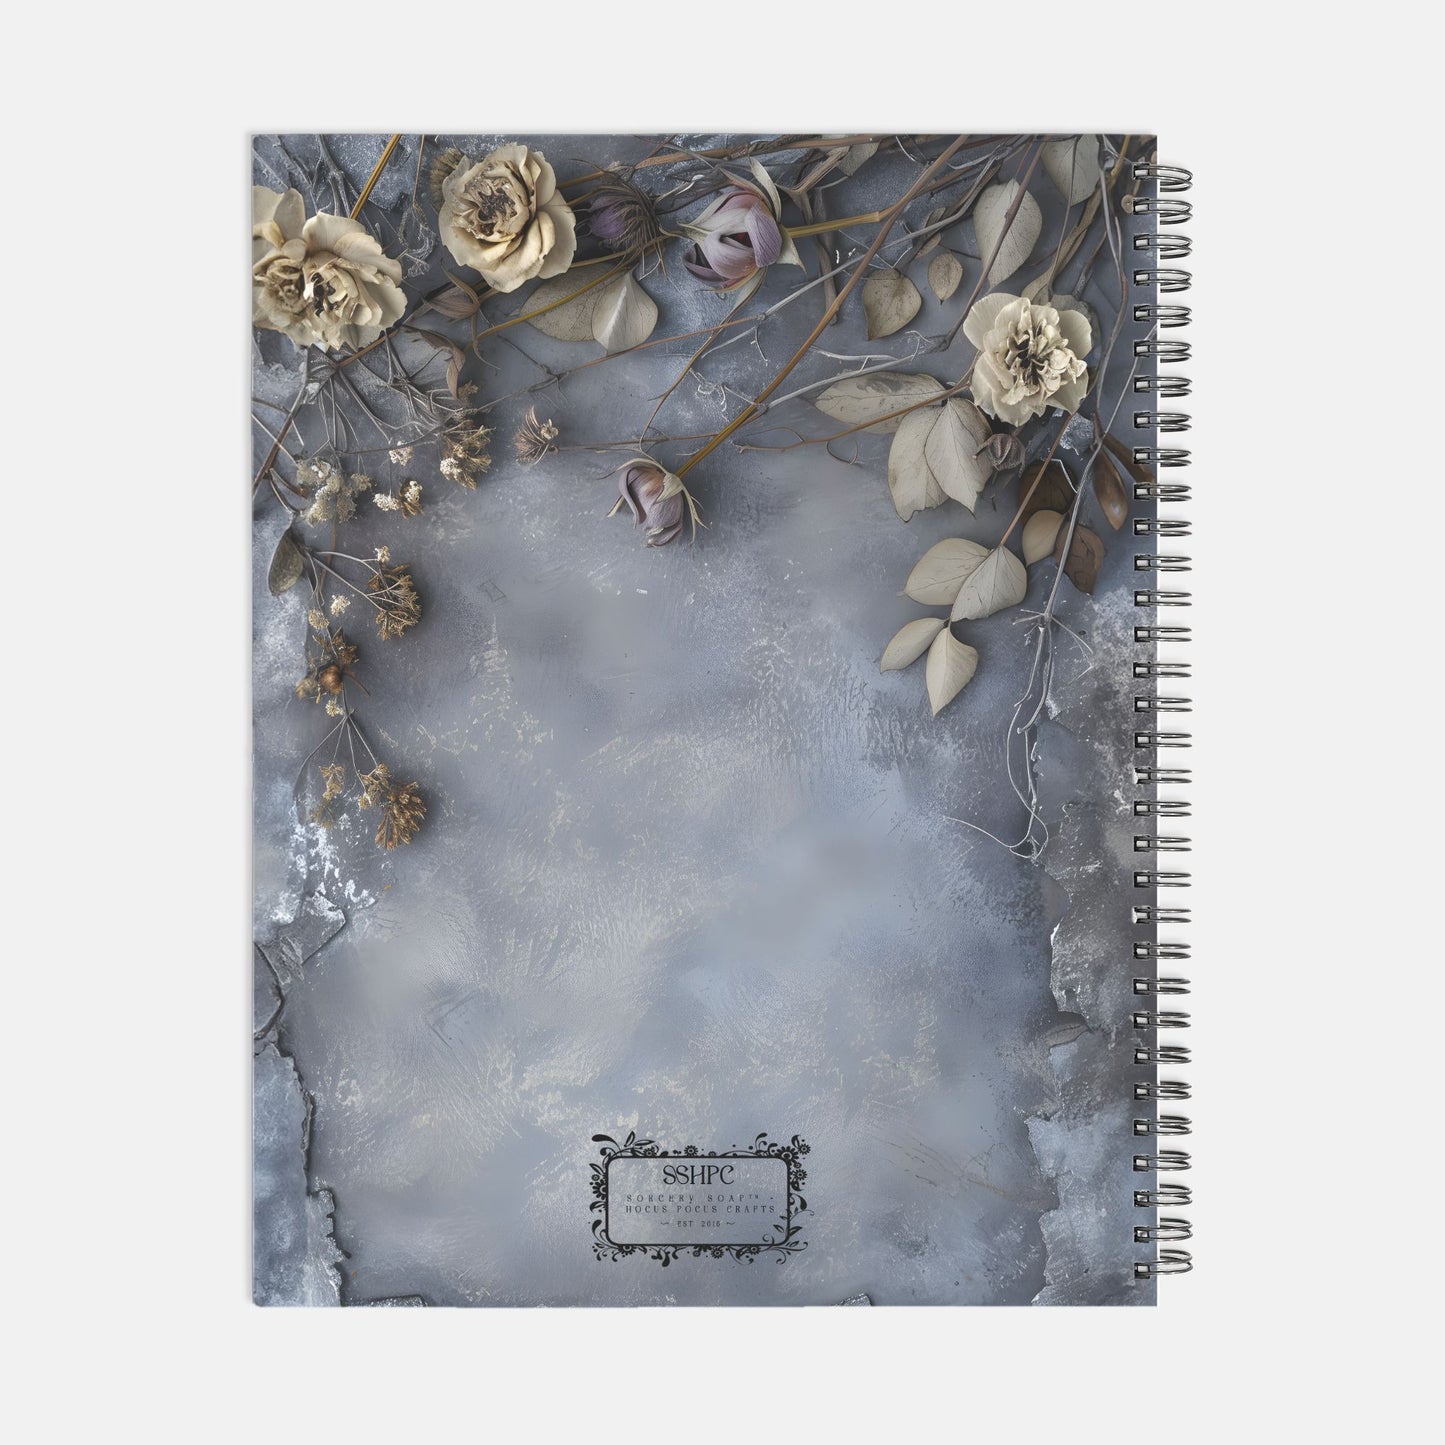 Faded Journal Notebook Hardcover Spiral 8.5 x 11